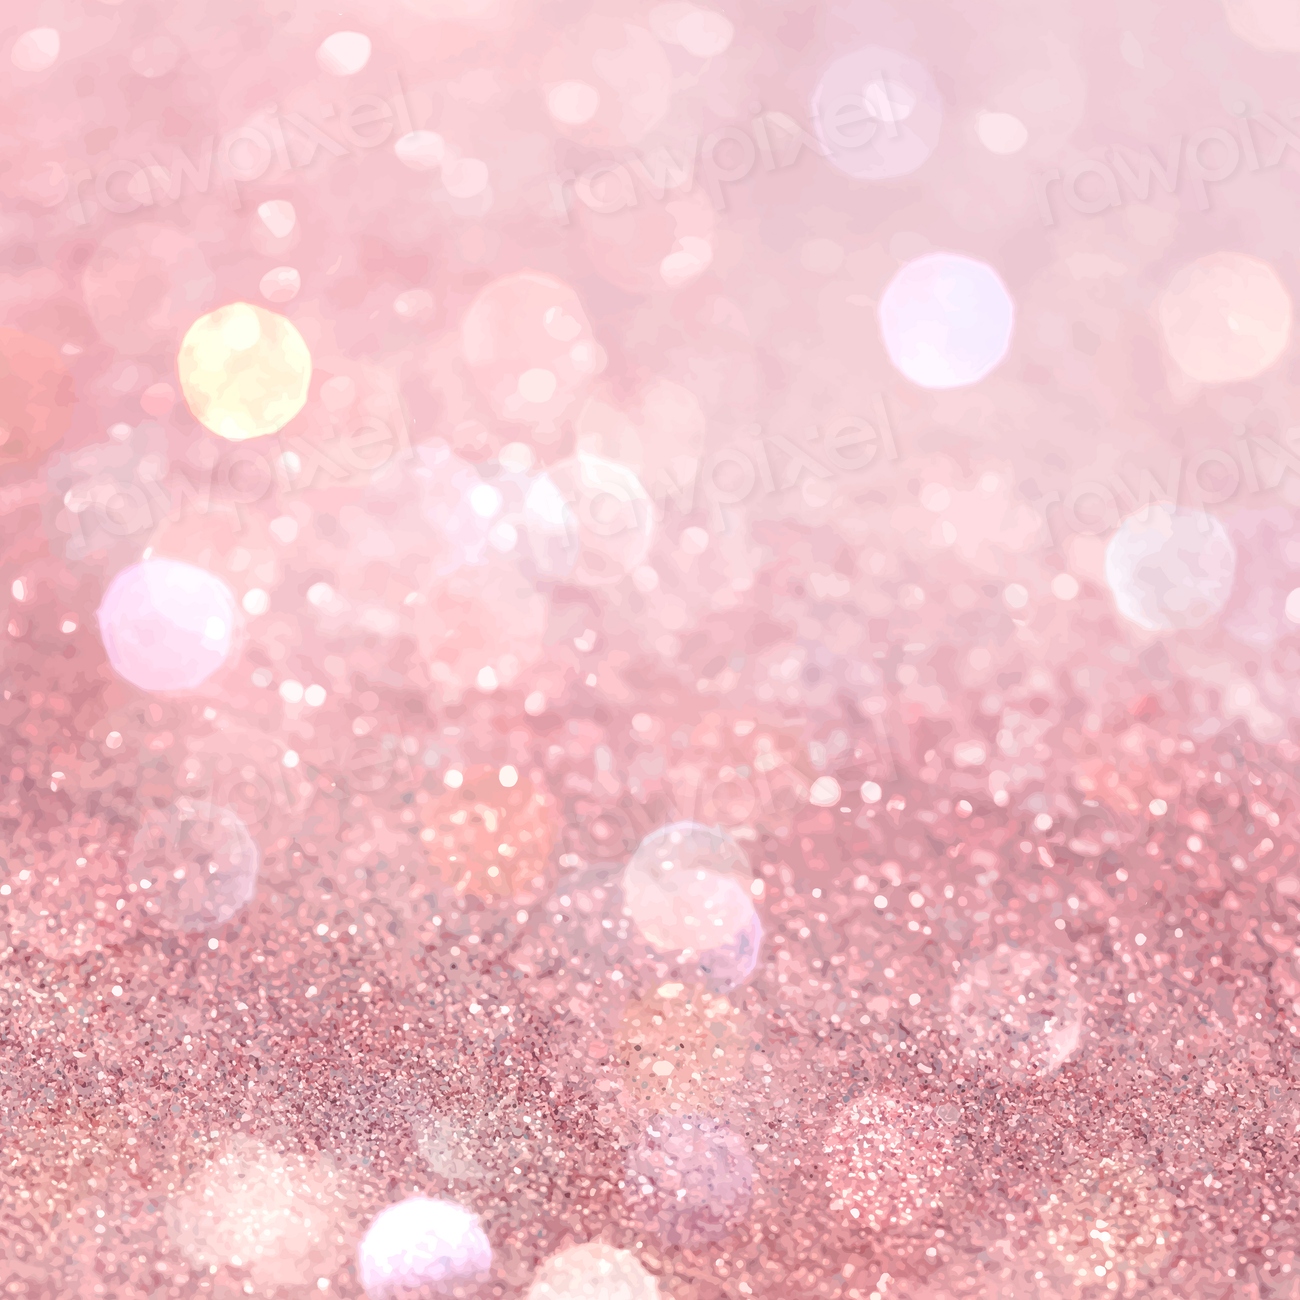 Glitter Backgrounds and Templates · High Quality Royalty Free Design ...